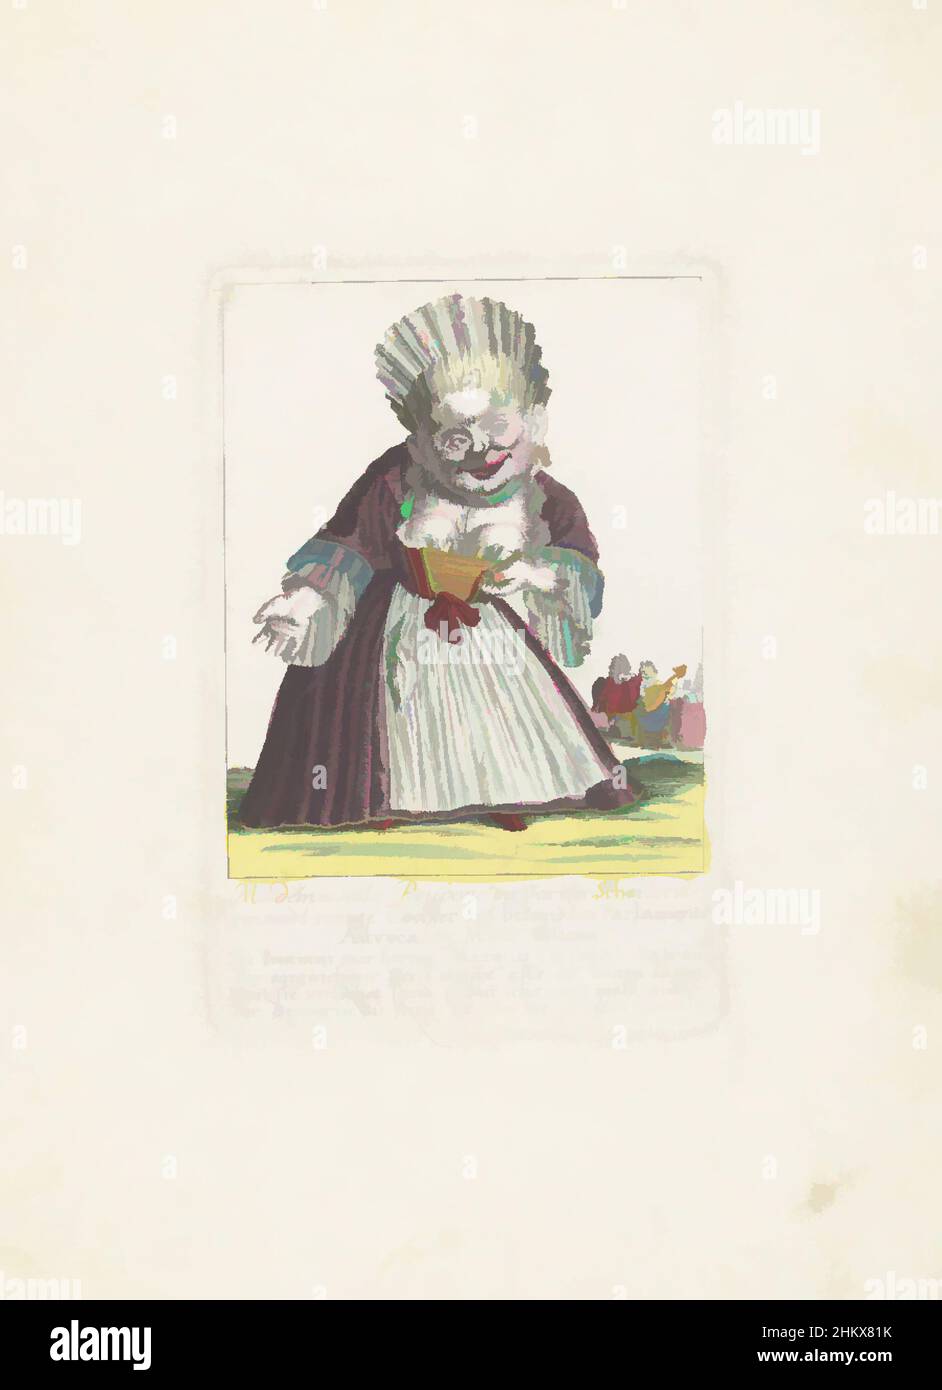 Art inspired by The dwarf Mademoiselle Poupon, as Parisian beauty, c. 1710, Mademoiselle Poupone, die Pariser Schönheit genandt, einige Tochter deß bekandten Parlaments Advocaten Monsr. Chican, Il Callotto resurcitato oder Neu eingerichtes Zwerchen Cabinet (series title), The dwarf, Classic works modernized by Artotop with a splash of modernity. Shapes, color and value, eye-catching visual impact on art. Emotions through freedom of artworks in a contemporary way. A timeless message pursuing a wildly creative new direction. Artists turning to the digital medium and creating the Artotop NFT Stock Photo